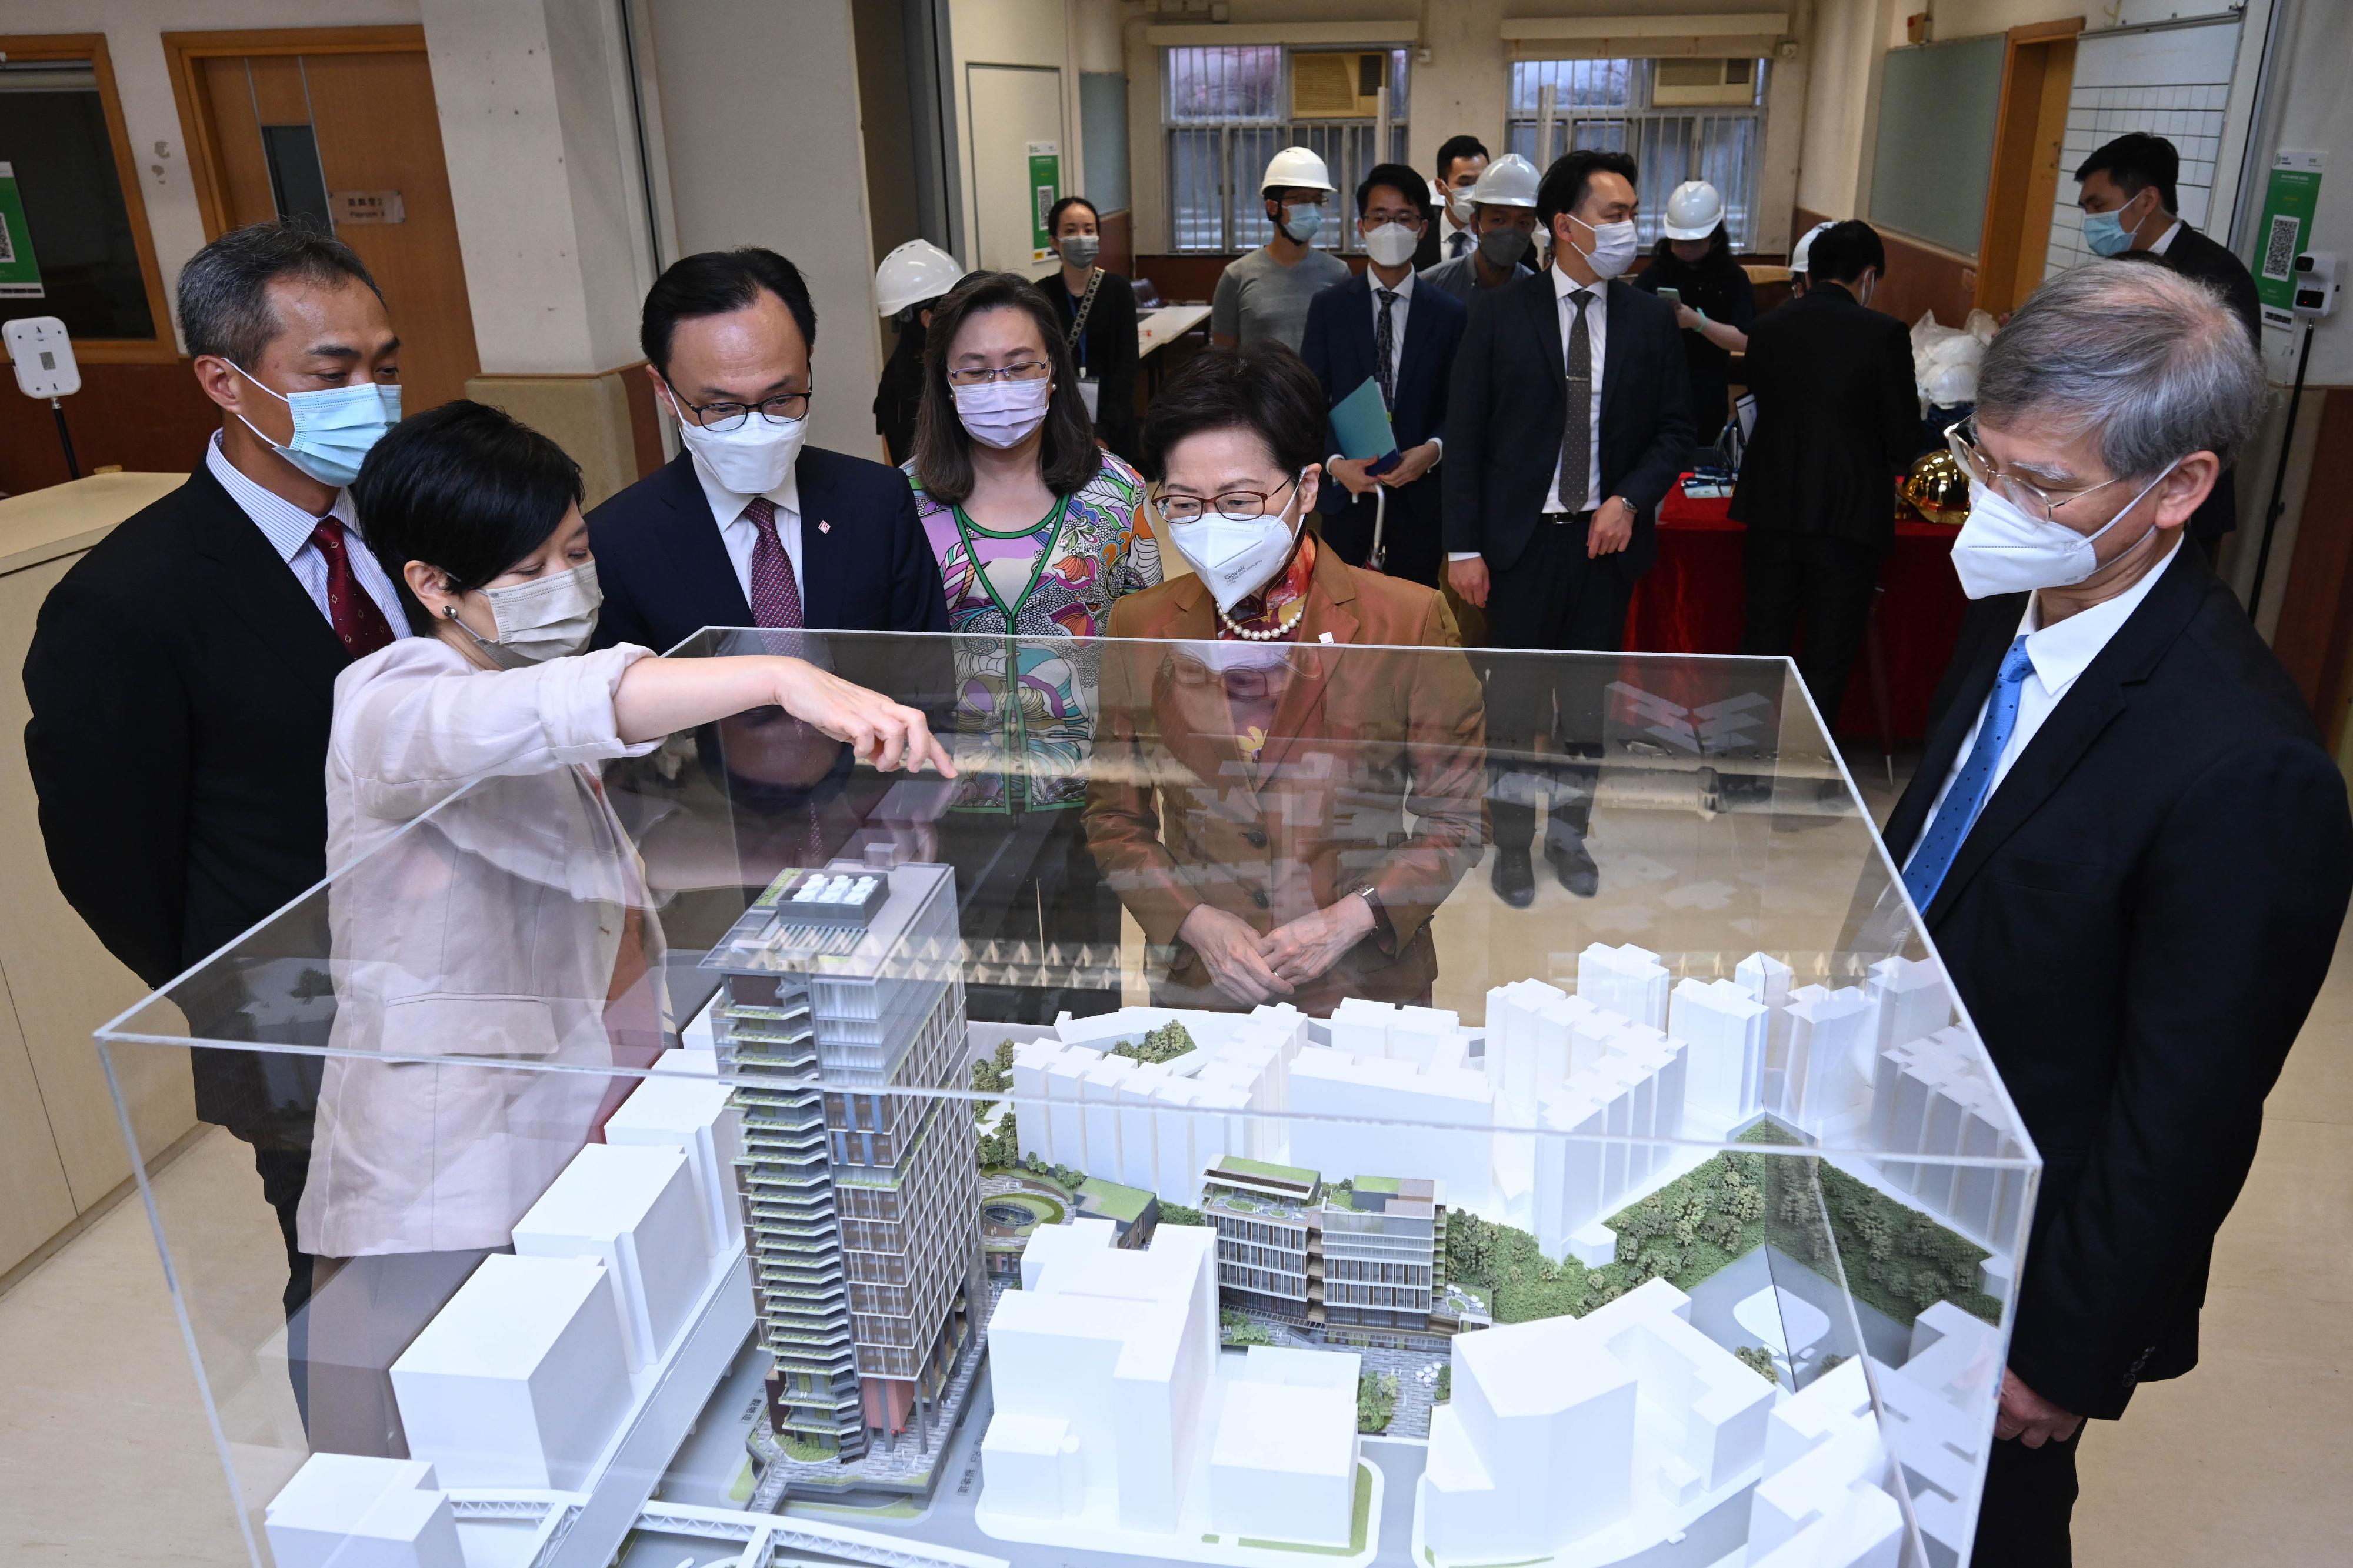 The Chief Executive, Mrs Carrie Lam, officiated at the Kwun Tong Composite Development Project and Civil Service College Ground Breaking Ceremony this afternoon (June 9). Photo shows Mrs Lam (second right), accompanied by the Secretary for Labour and Welfare, Dr Law Chi-kwong (first right); the Secretary for the Civil Service, Mr Patrick Nip (third left); the Permanent Secretary for the Civil Service, Mrs Ingrid Yeung (centre); and the Head of the Civil Service College (Designate), Mr Kwok Yam-shu (second left), being briefed by the Director of Architectural Services, Ms Winnie Ho (first left), on the project while viewing a model.